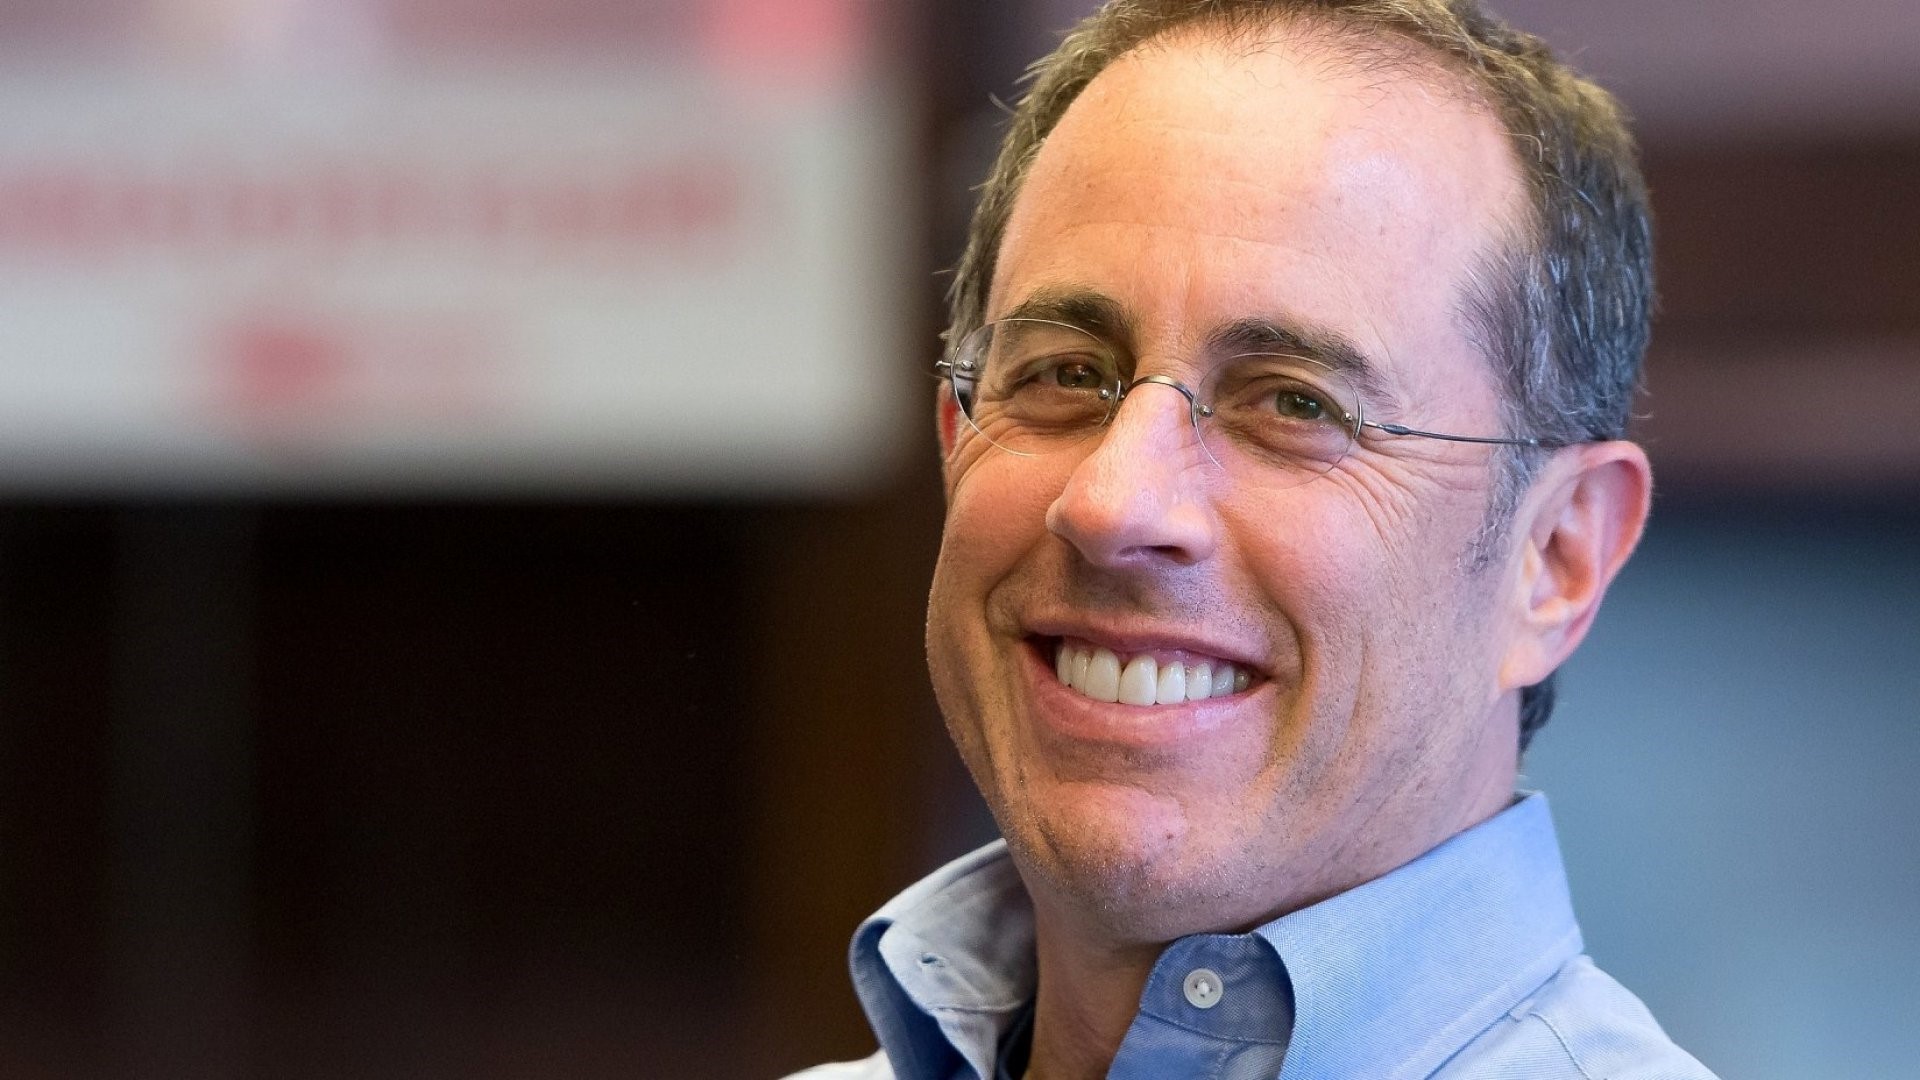 Jerry Seinfeld Stays Cool Amid Anti-Israel Protesters' Heckling